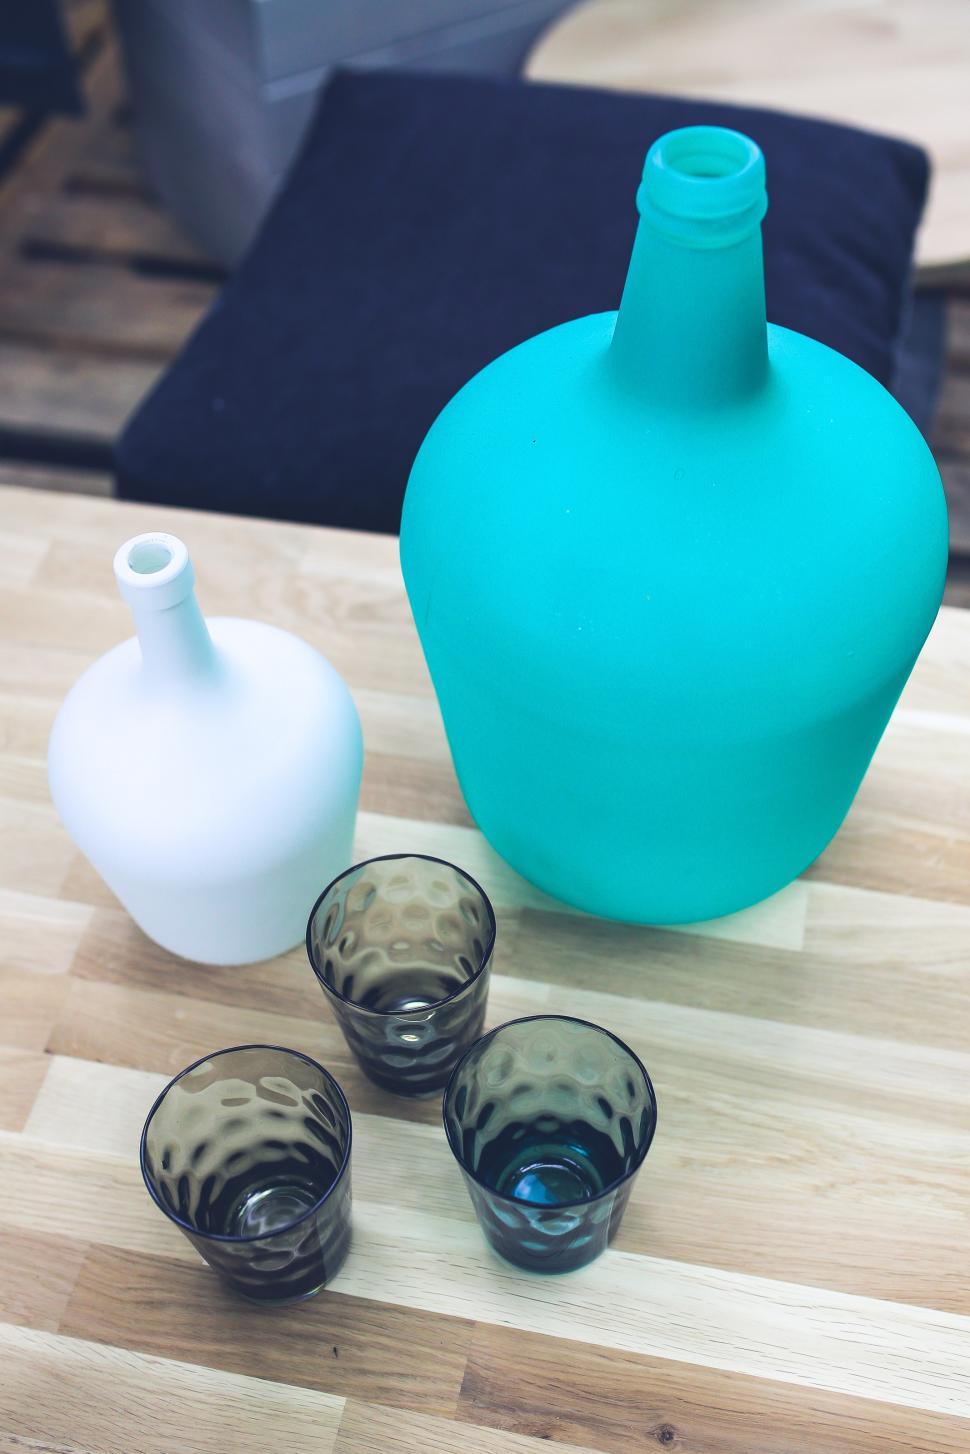 Free Image of Glasses and Blue Vase on Table 